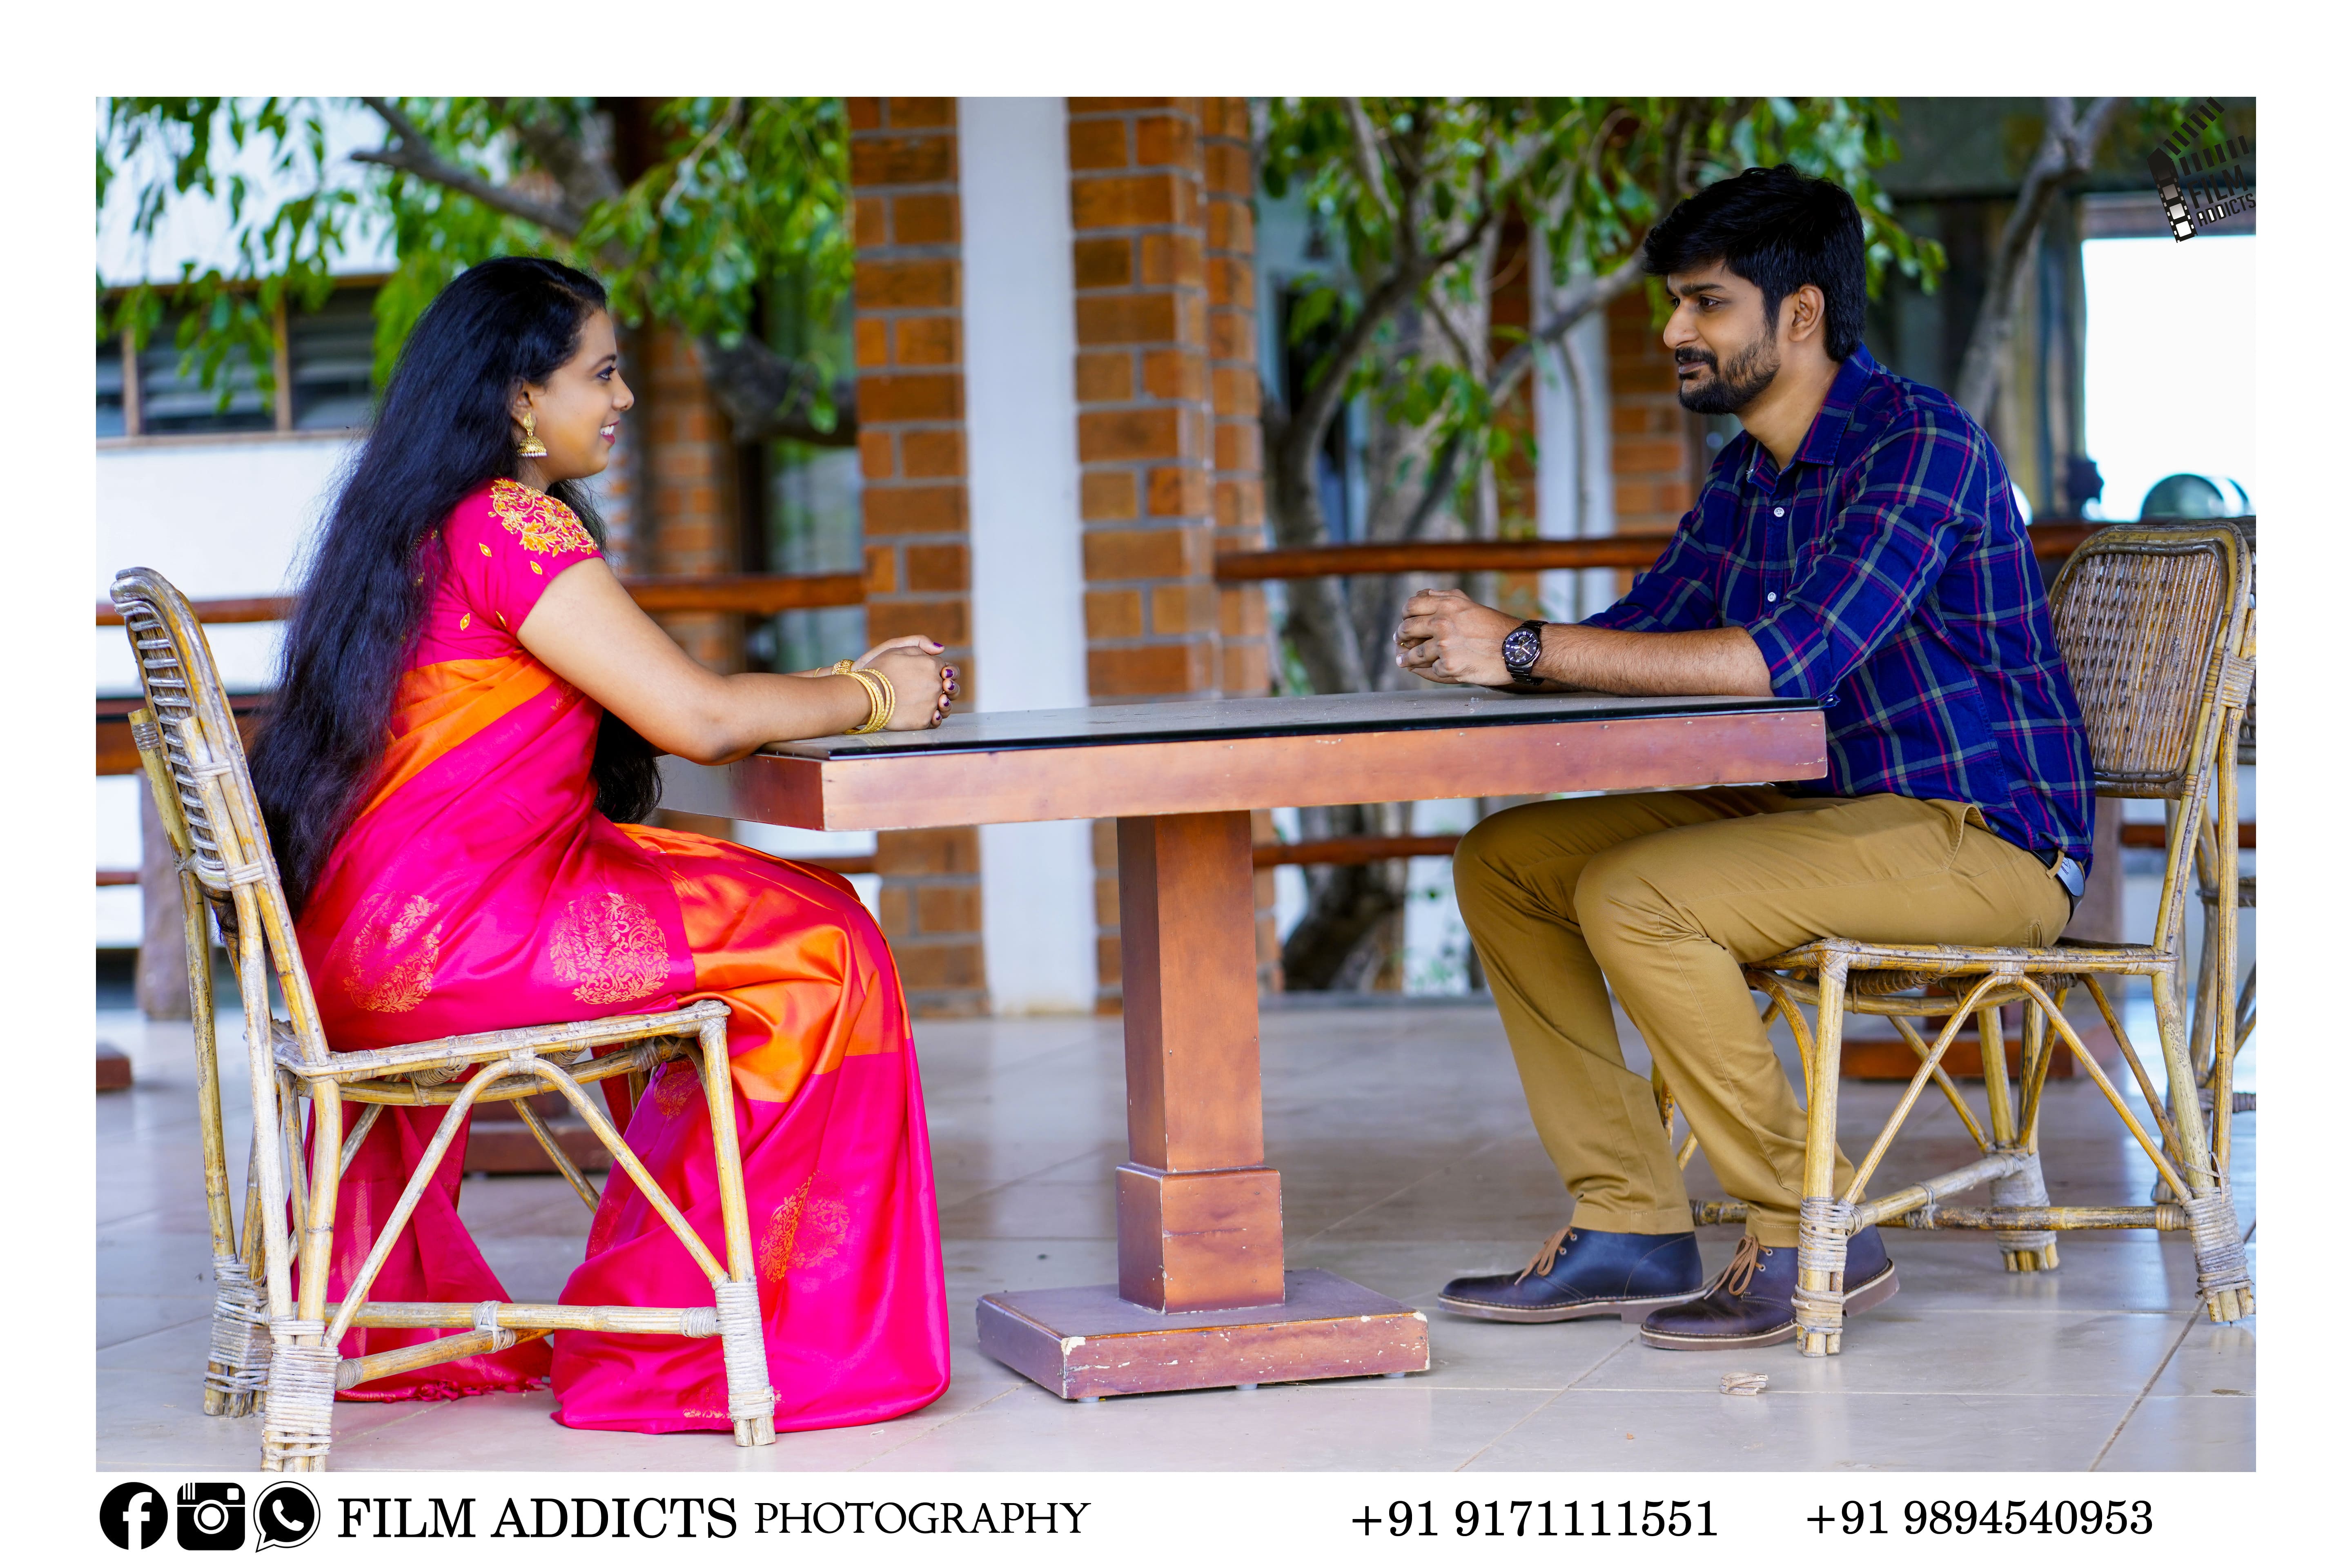 best-candid-photographers-in-Dindigul,Candid-photography-in-Dindigul,best-Outdoor -photography-in-Dindigul,
               Best-candid-photography-in-Dindigul,Best-candid-photographer,candid-photographer-in-Dindigul,drone-photographer-in-Dindigul,helicam-photographer-in-Dindigul,candid-Outdoor-photographers-in-Dindigul,photographers-in-Dindigul,
               professional-Outdoor-photographers-in-Dindigul,top-Outdoor-filmmakers-in-Dindigul,Outdoor-cinematographers-in-Dindigul,Outdoor-cinimatography-in-Dindigul,Outdoor-photographers-in-Dindigul,Outdoor-teaser-in-Dindigul,
               asian-Outdoor-photography-in-Dindigul,best-candid-photographers-in-Dindigul,best-candid-videographers-in-Dindigul,best-photographers-in-Dindigul,best-Outdoor-photographers-in-Dindigul,best-nadar-Outdoor-photography-in-Dindigul,
               candid-photographers-in-Dindigul,destination-Outdoor-photographers-in-Dindigul,fashion-photographers-in-Dindigul, Dindigul-famous-stage-decorations